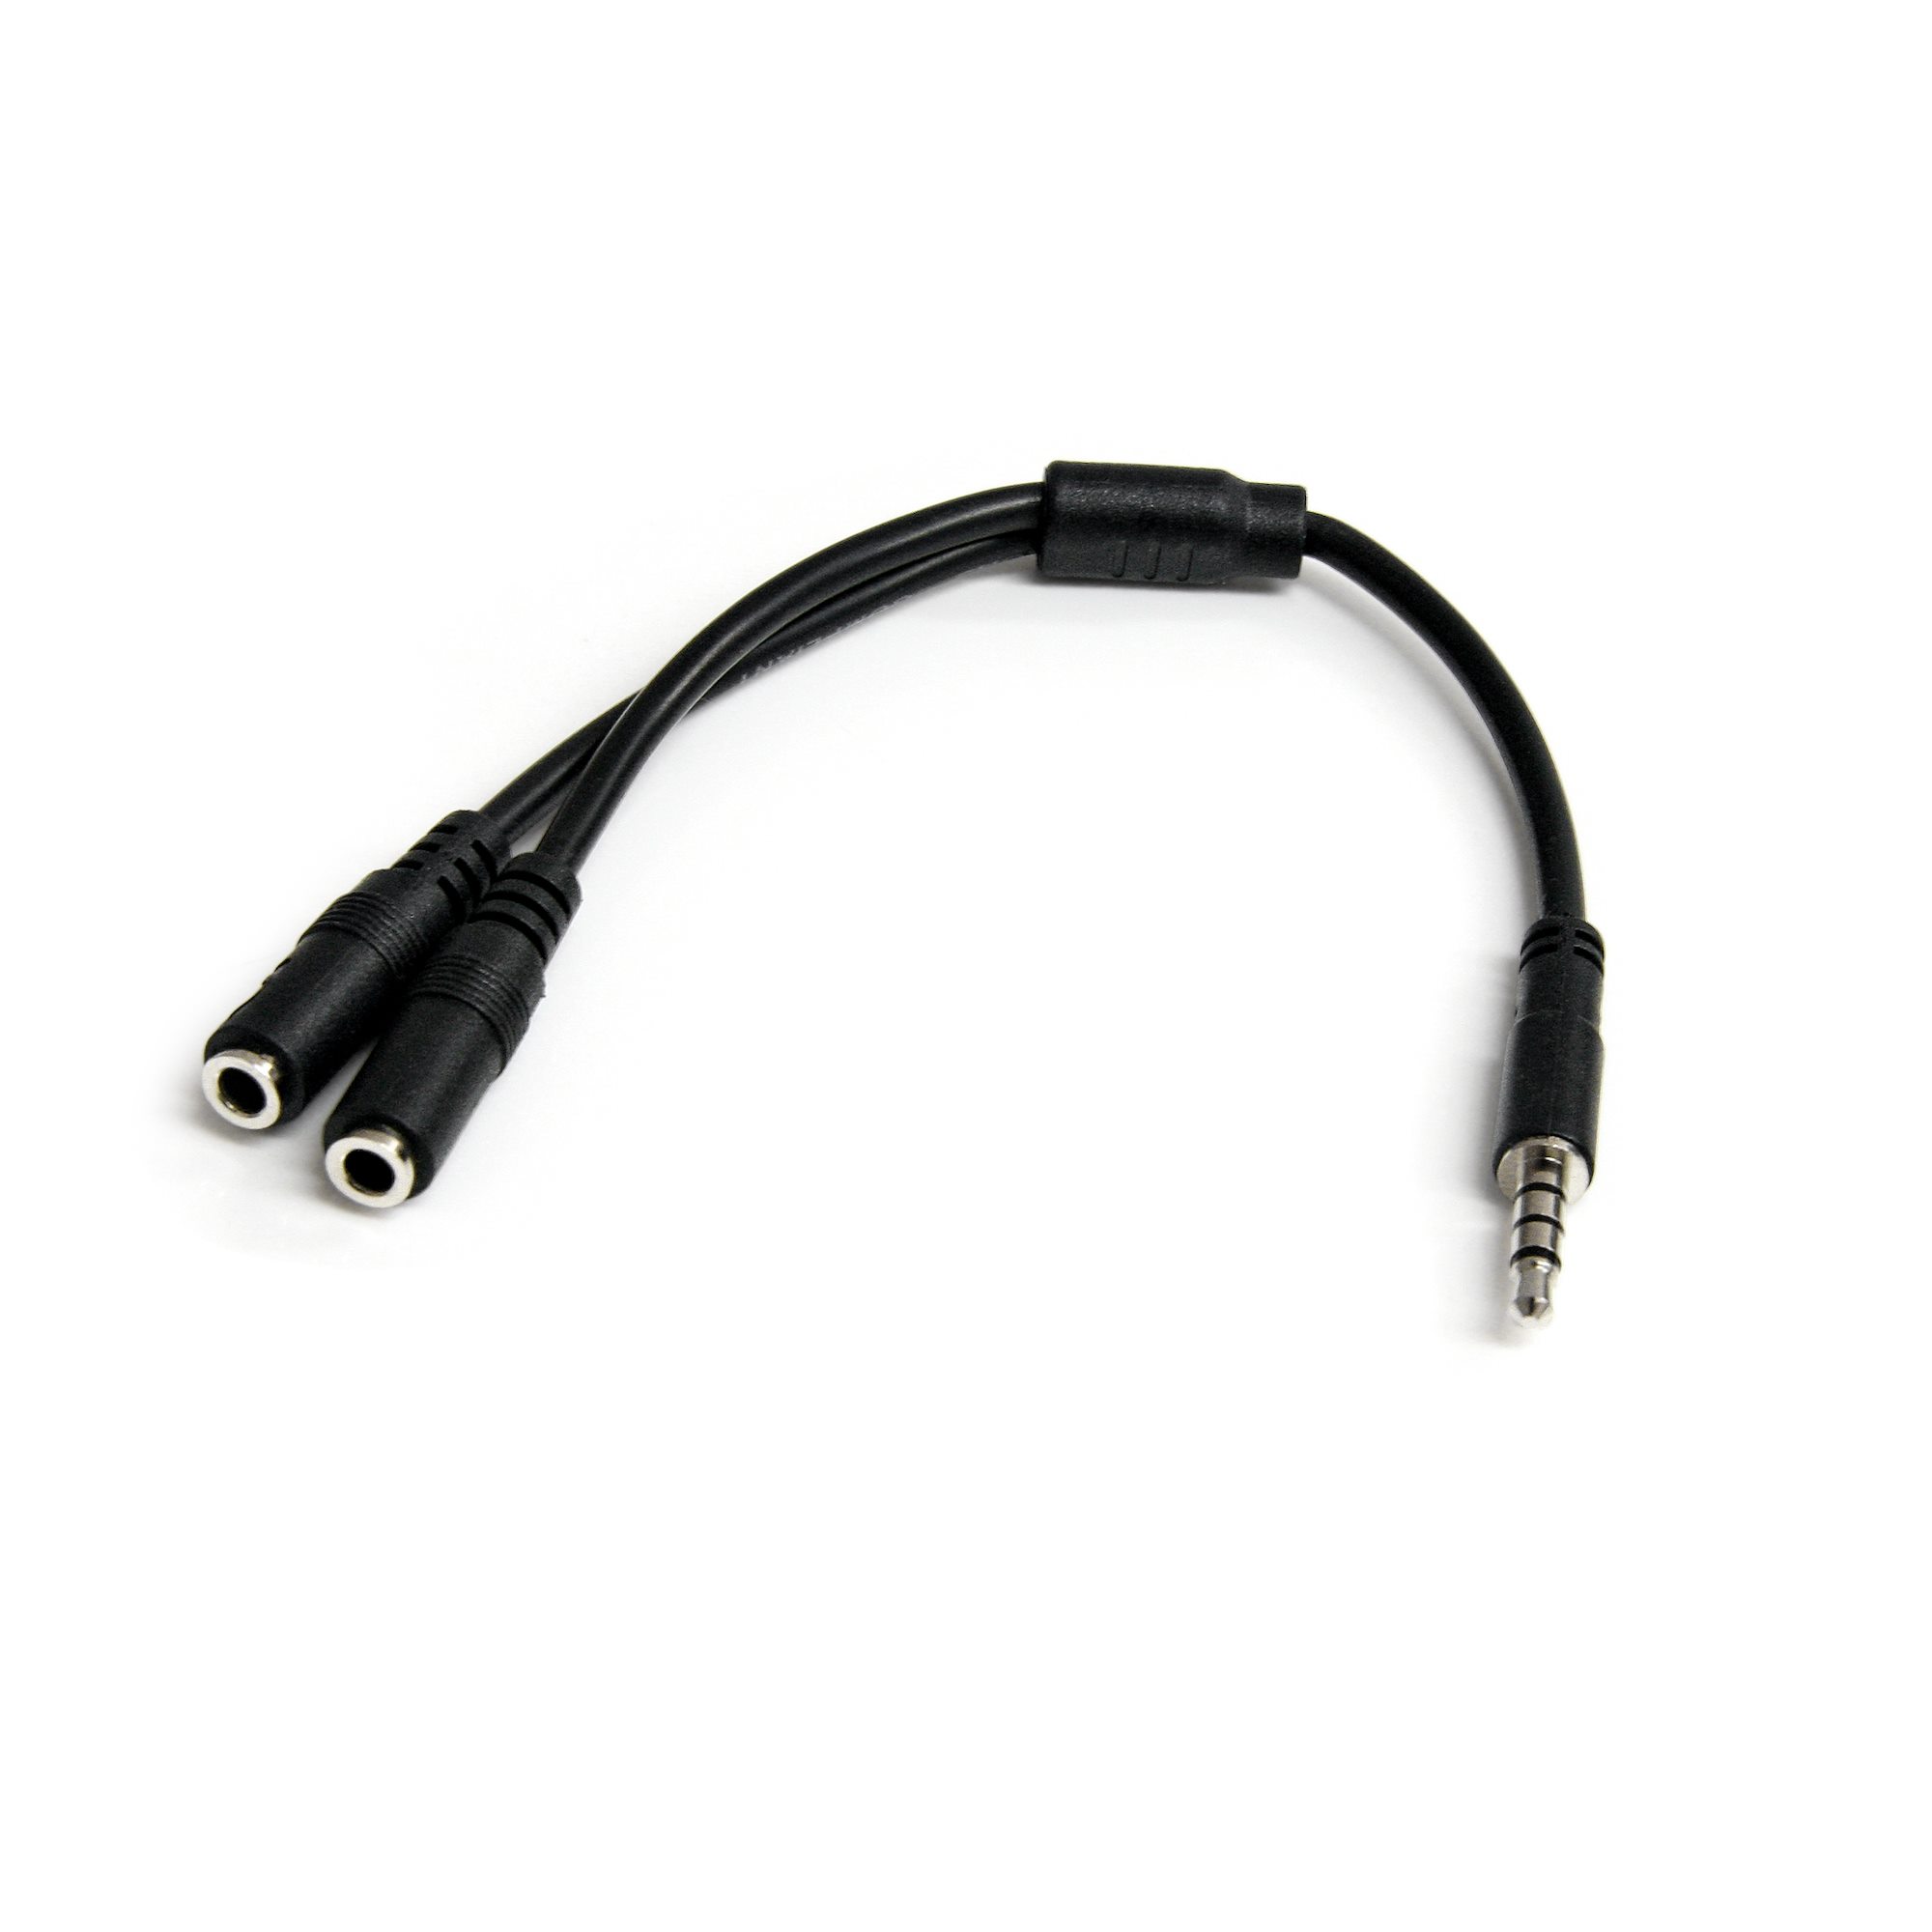 【MUYHSMFF】HEADSET ADAPTER FOR HEADSETS WIT